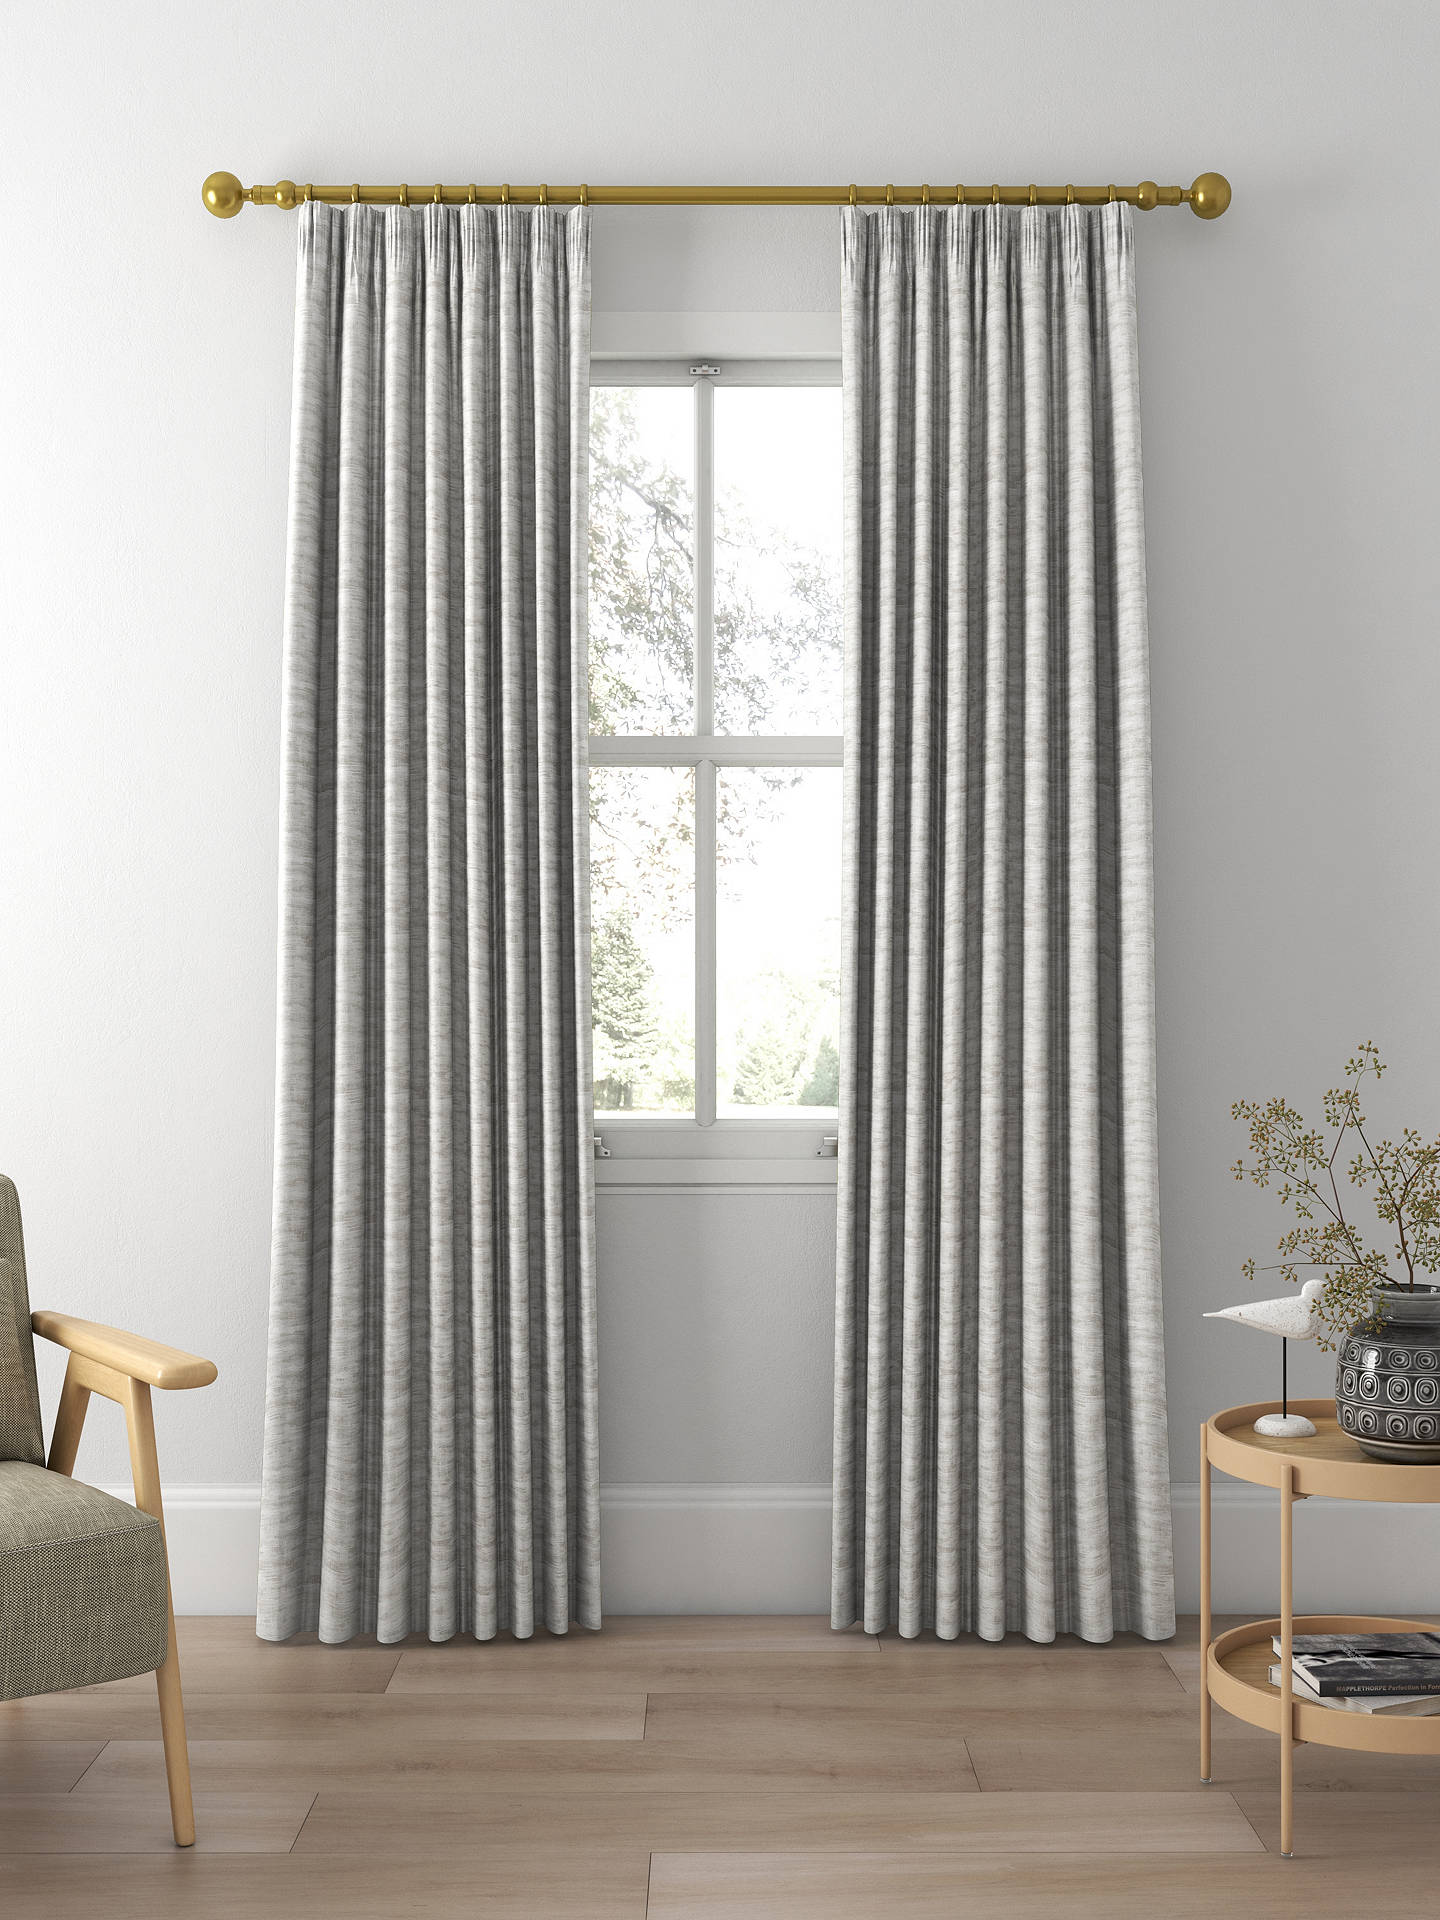 Laura Ashley Whinfell Made to Measure Curtains, Silver